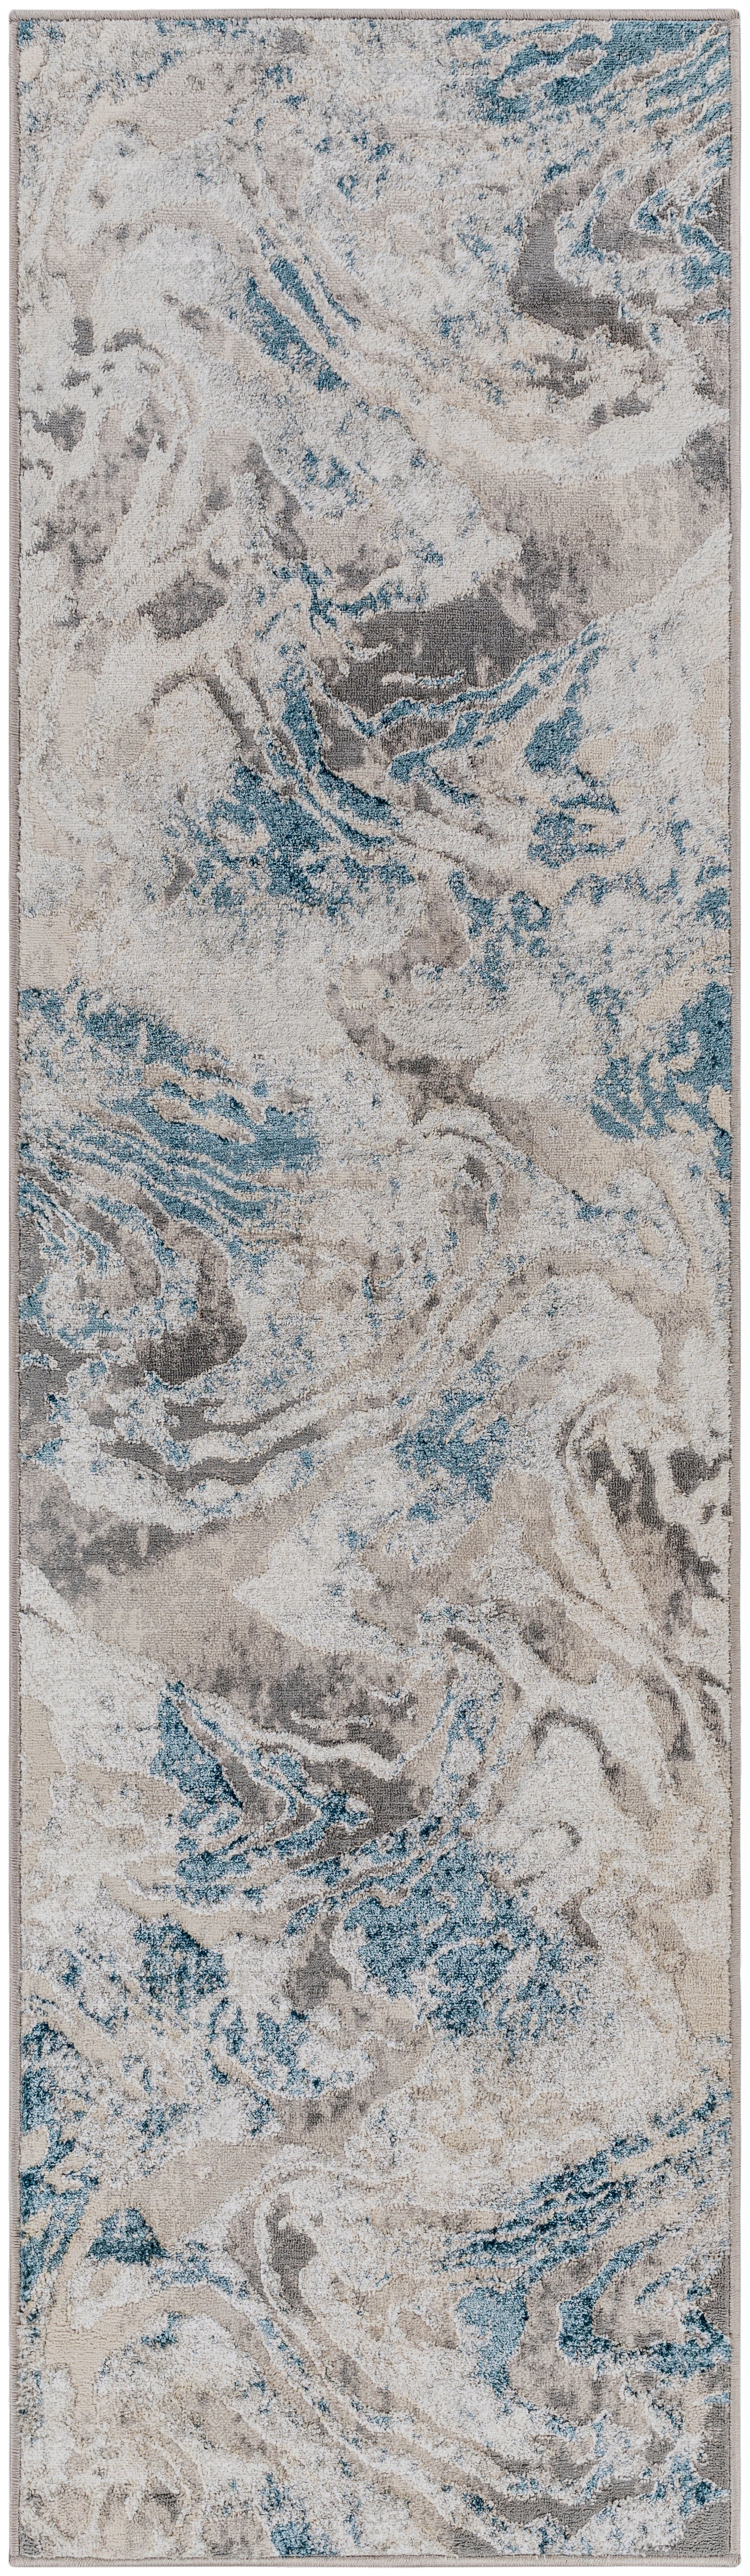 Firenze 30317 Machine Woven Synthetic Blend Indoor Area Rug by Surya Rugs